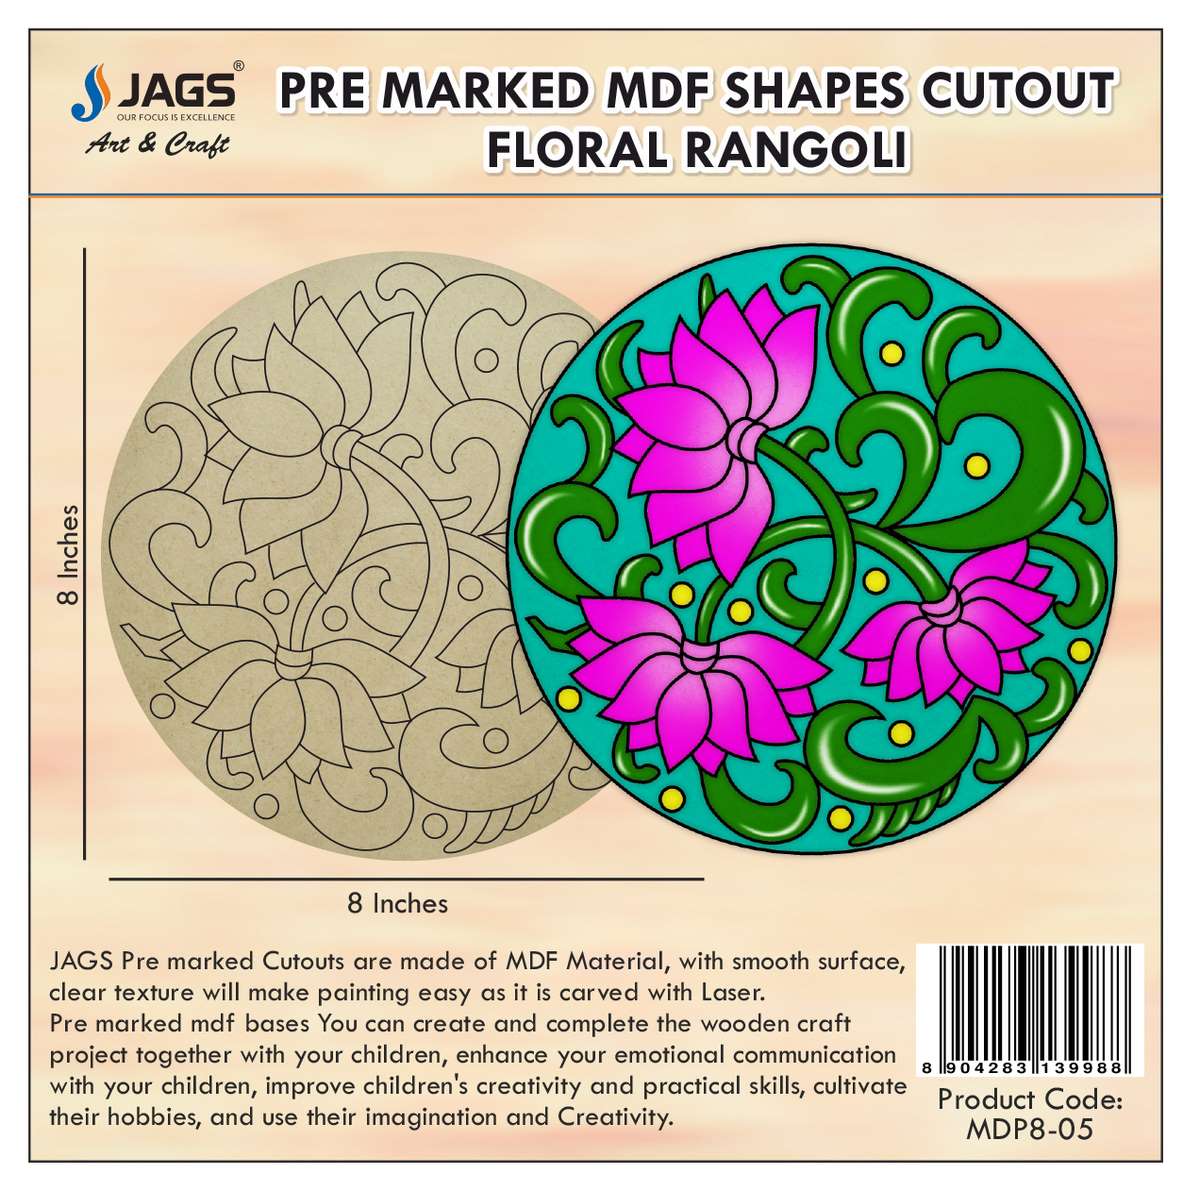 jags-mumbai MDF Pre-marked MDF  Shapes Cutout with floral rangoli for DIY Crafts, Pichwai painting